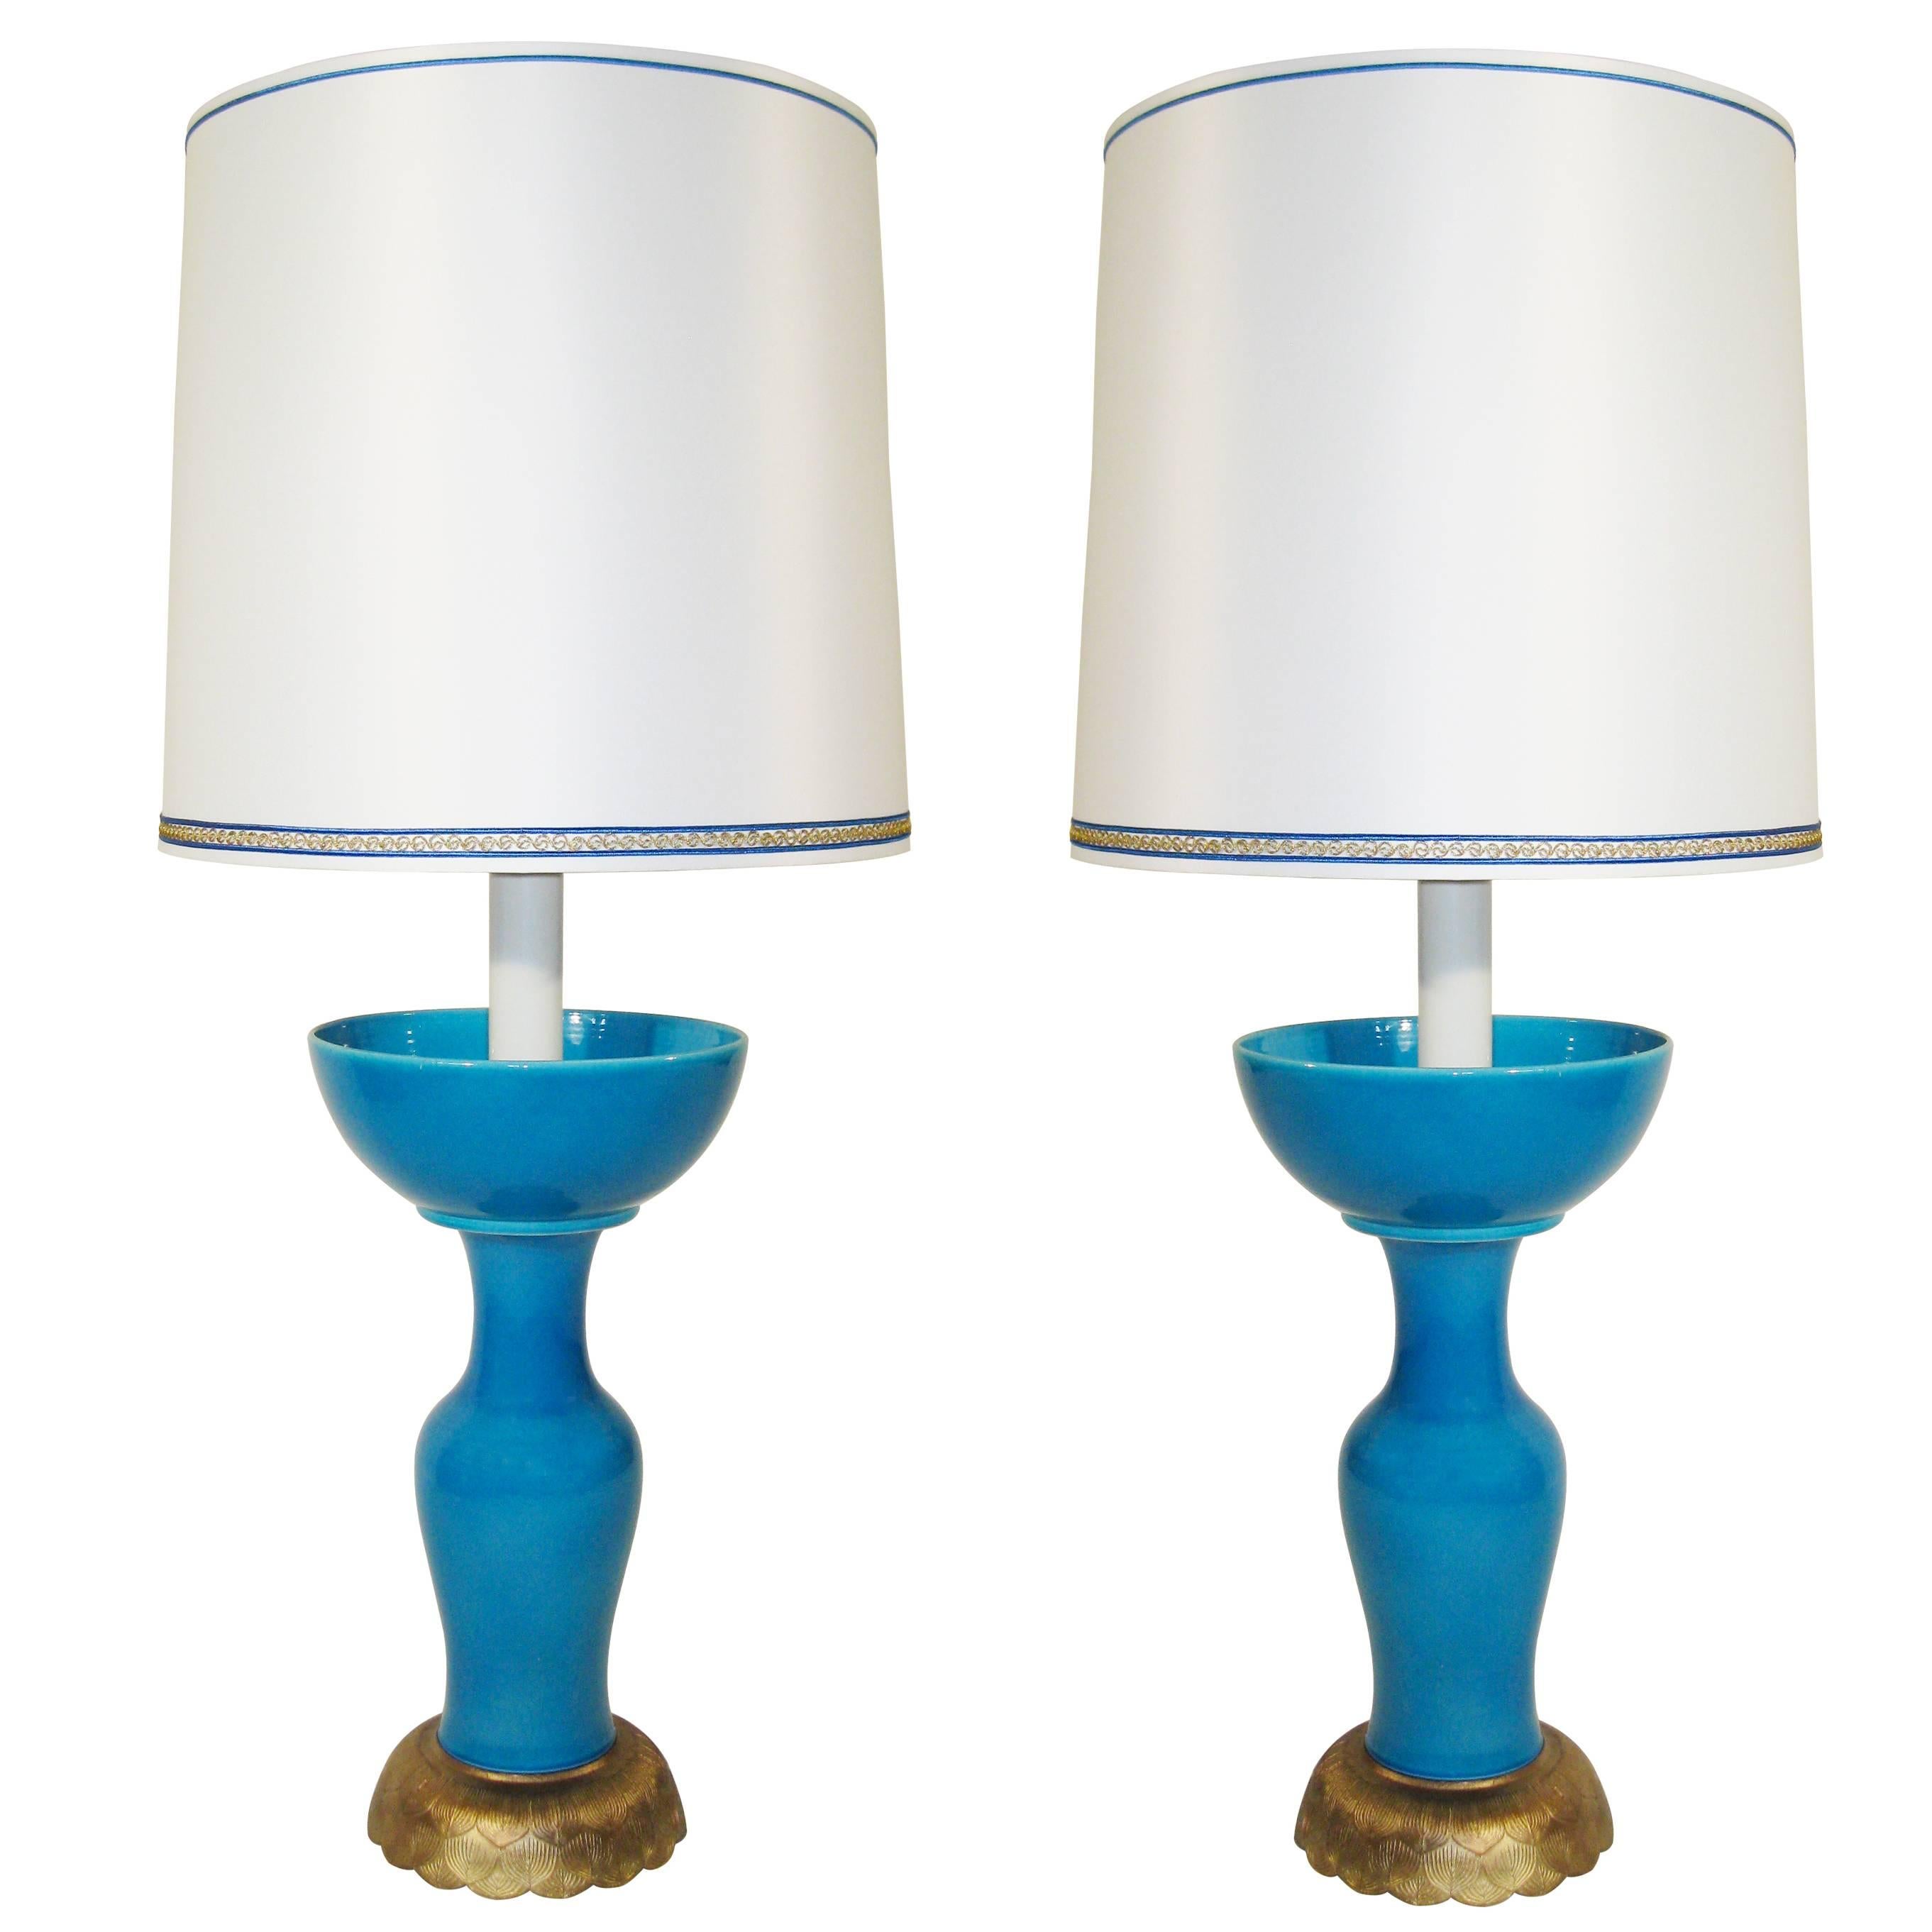 Pair of Table Lamps Designed by Frank Kyle, circa 1960